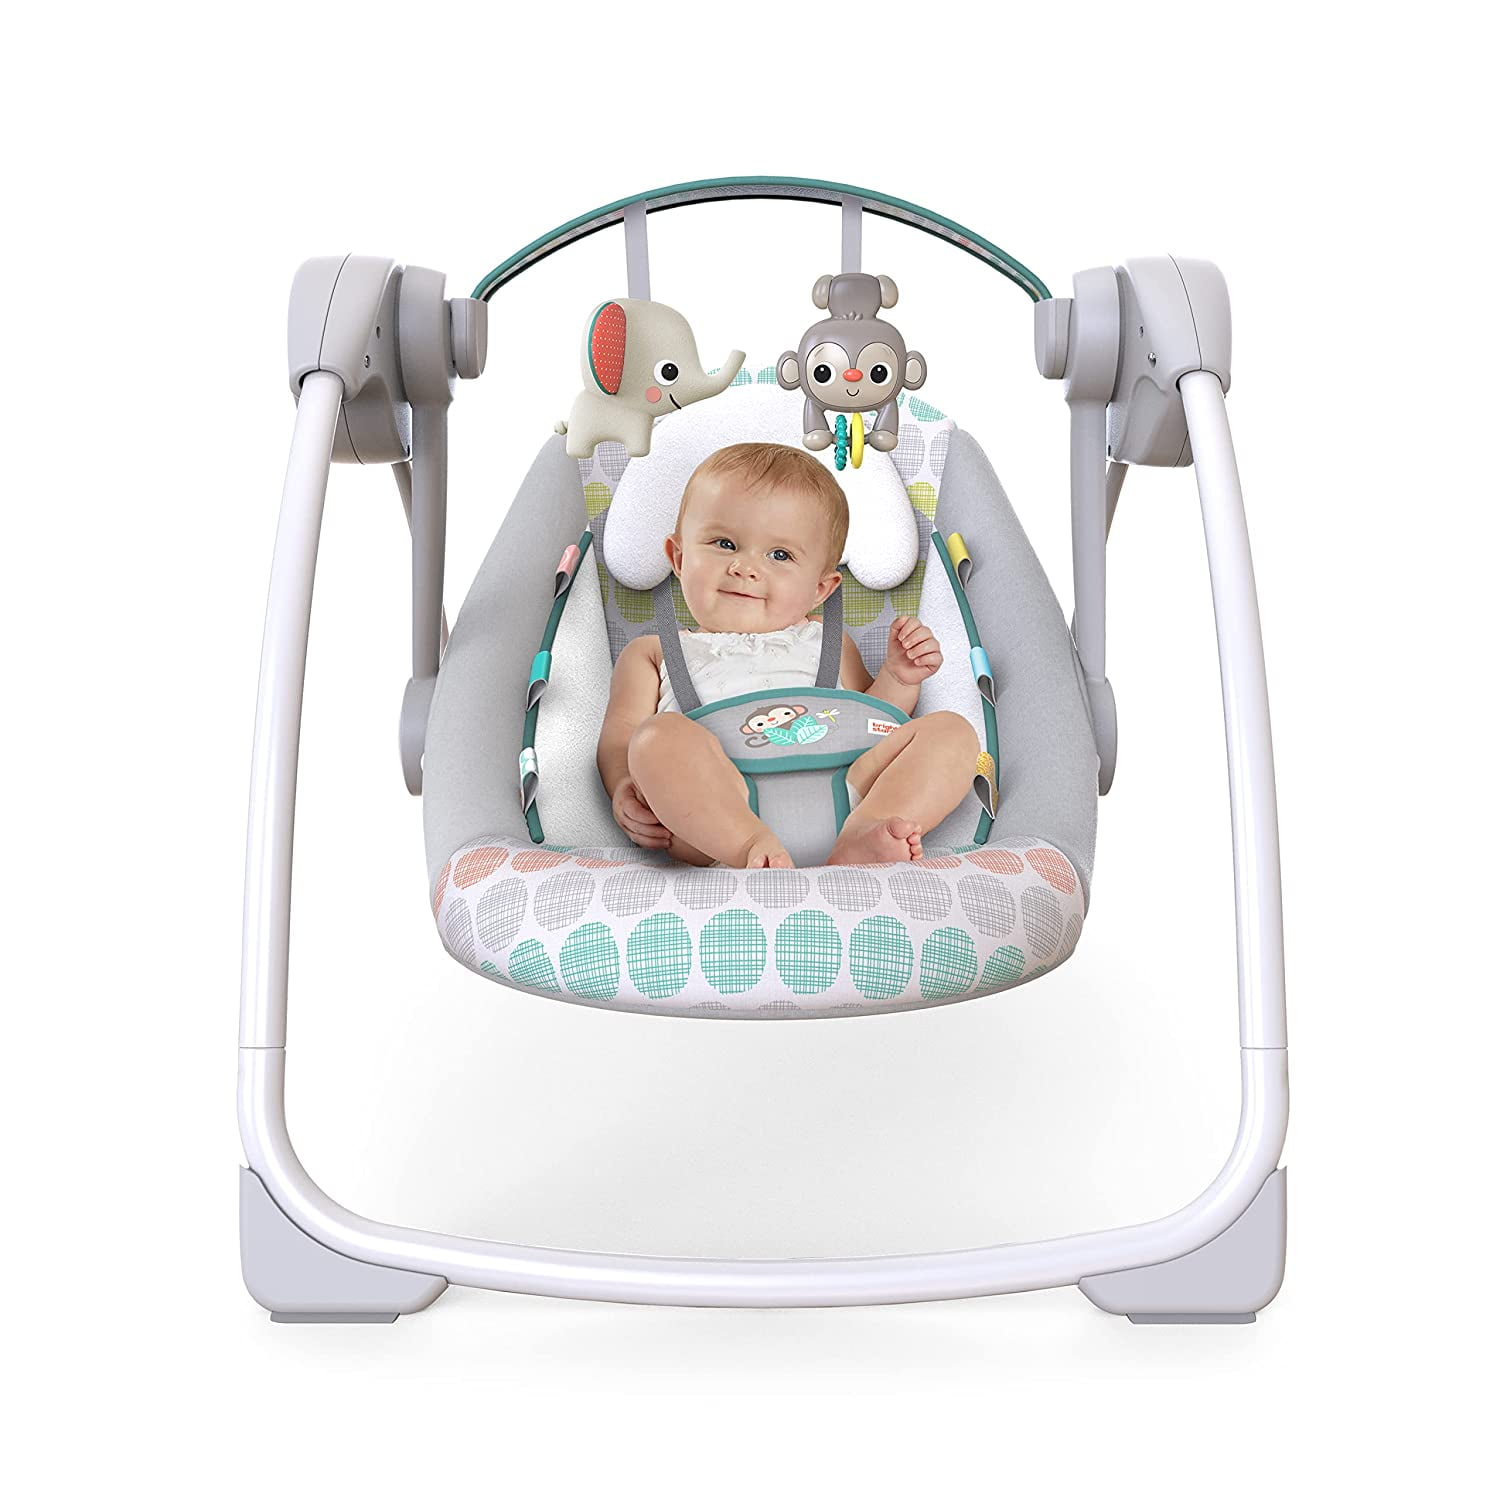 Baby Swings Portable Automatic Baby Swings for Infants 4-speed Adjustable Safe Soothing for Baby with Music Box Detachable Washable Mattress Breathable Mesh and Seat Belt for Infants 0-12 Months Girls 